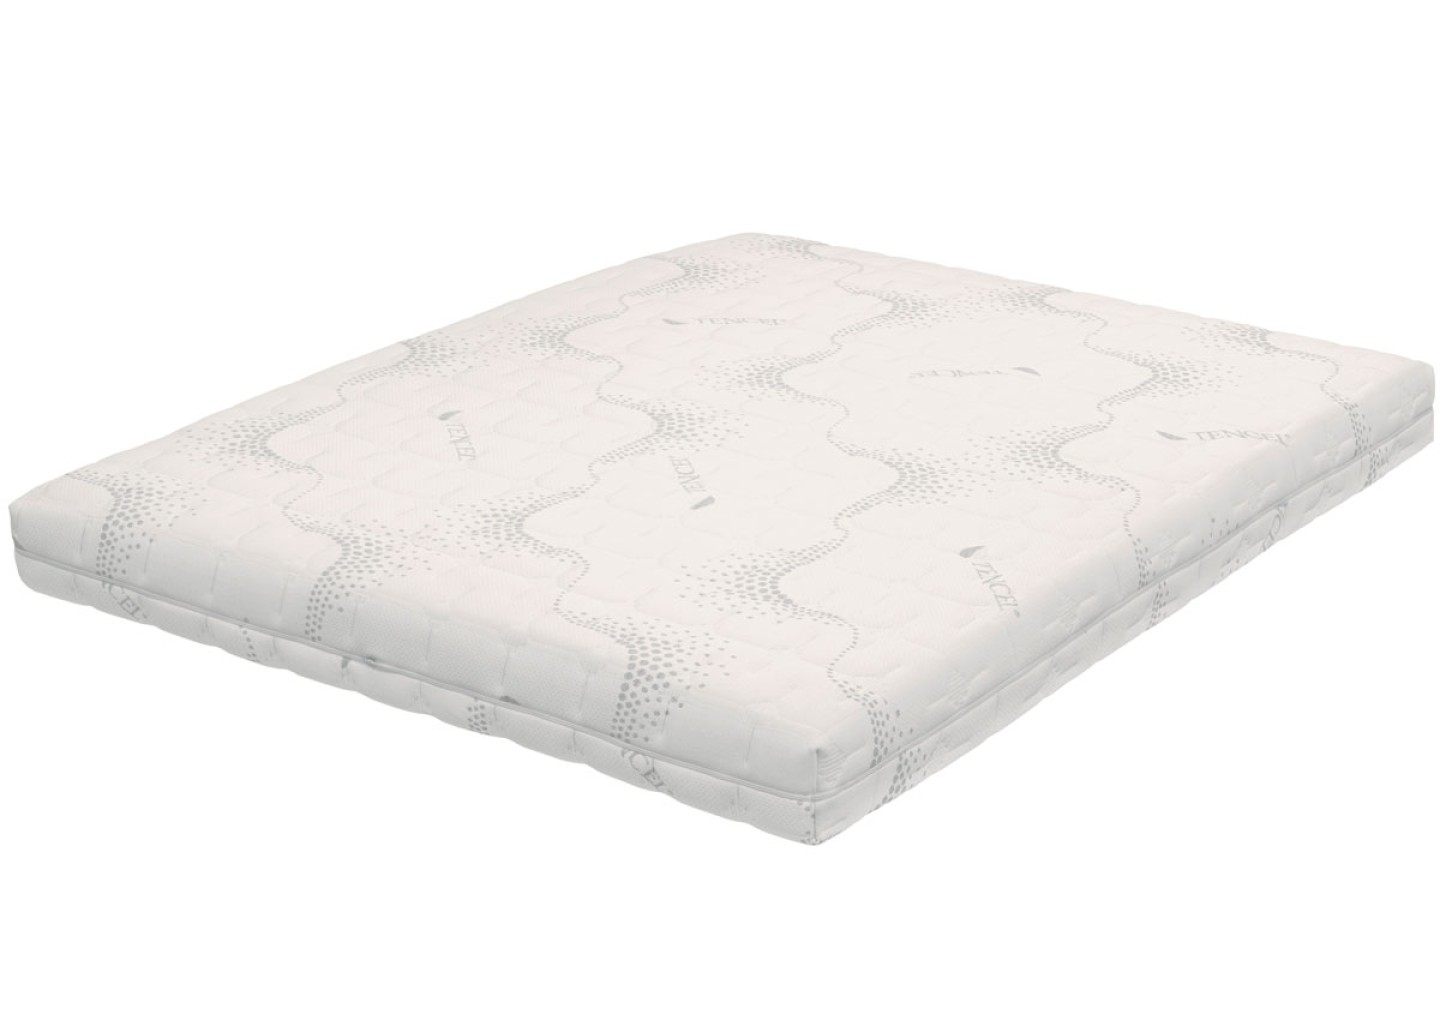 THE RELAX MATTRESS by Elite Strom